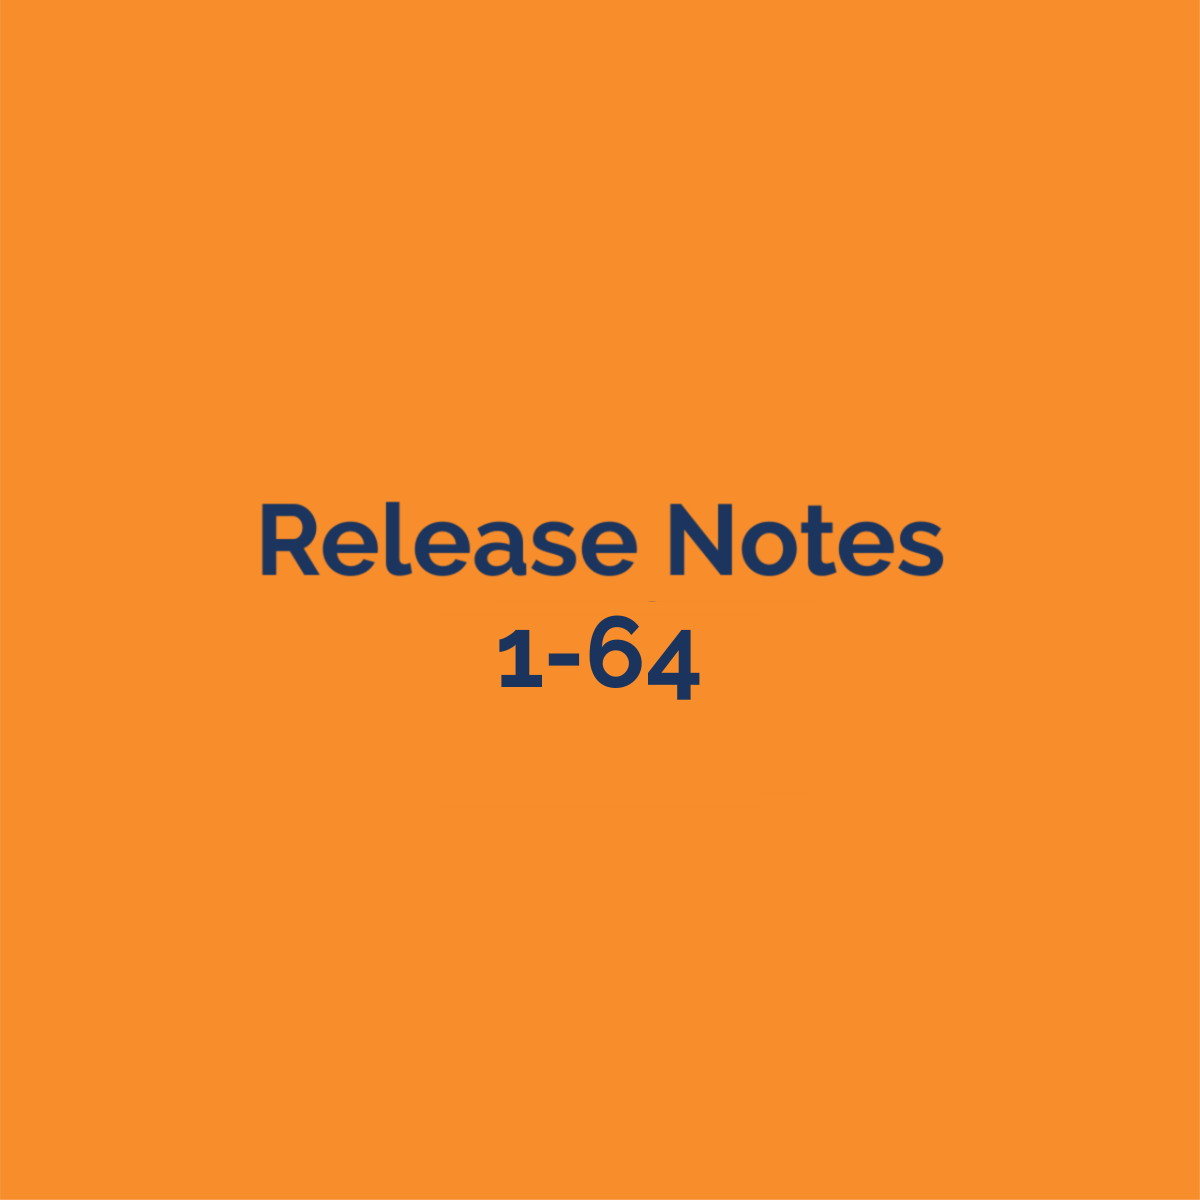 release notes 1-64